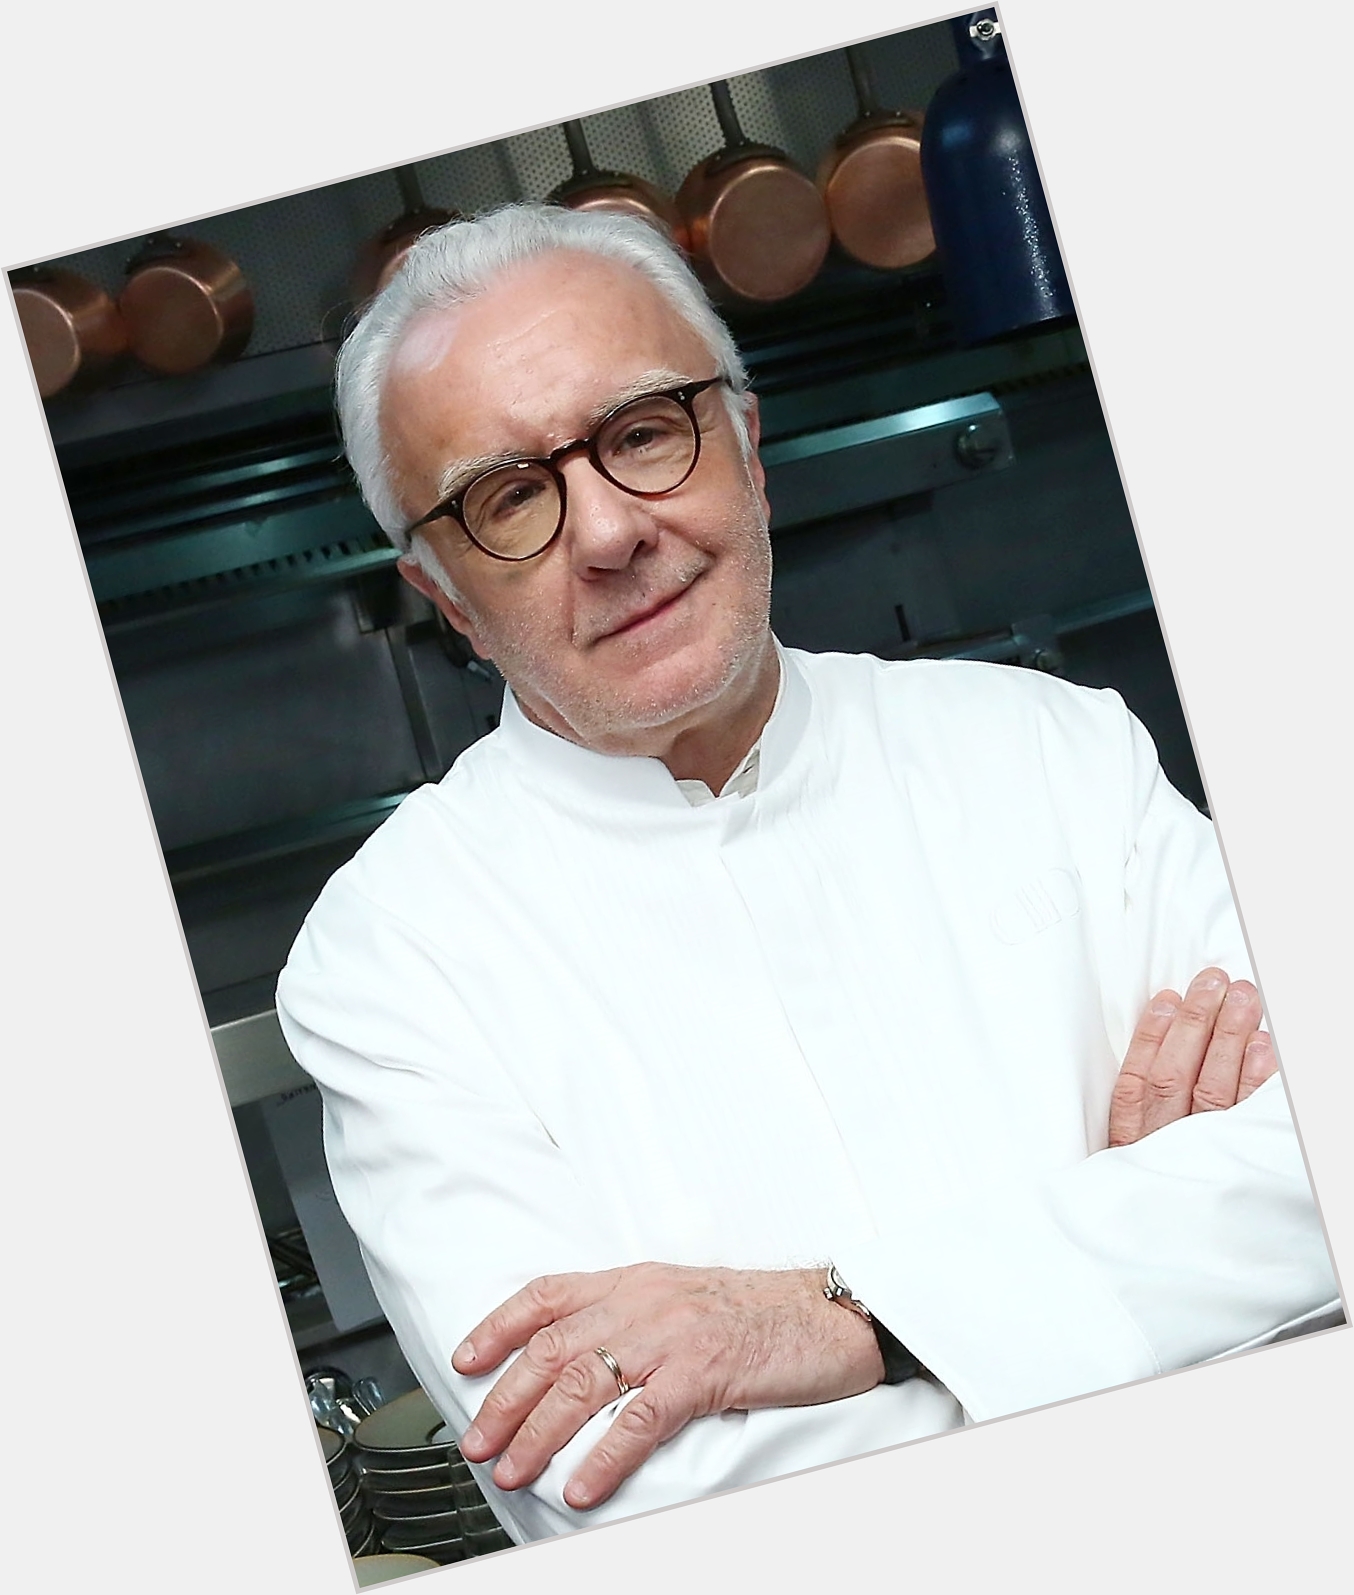 <a href="/hot-men/alain-ducasse/is-he-married-what-famous-known-signature-dish">Alain Ducasse</a> Average body,  salt and pepper hair & hairstyles